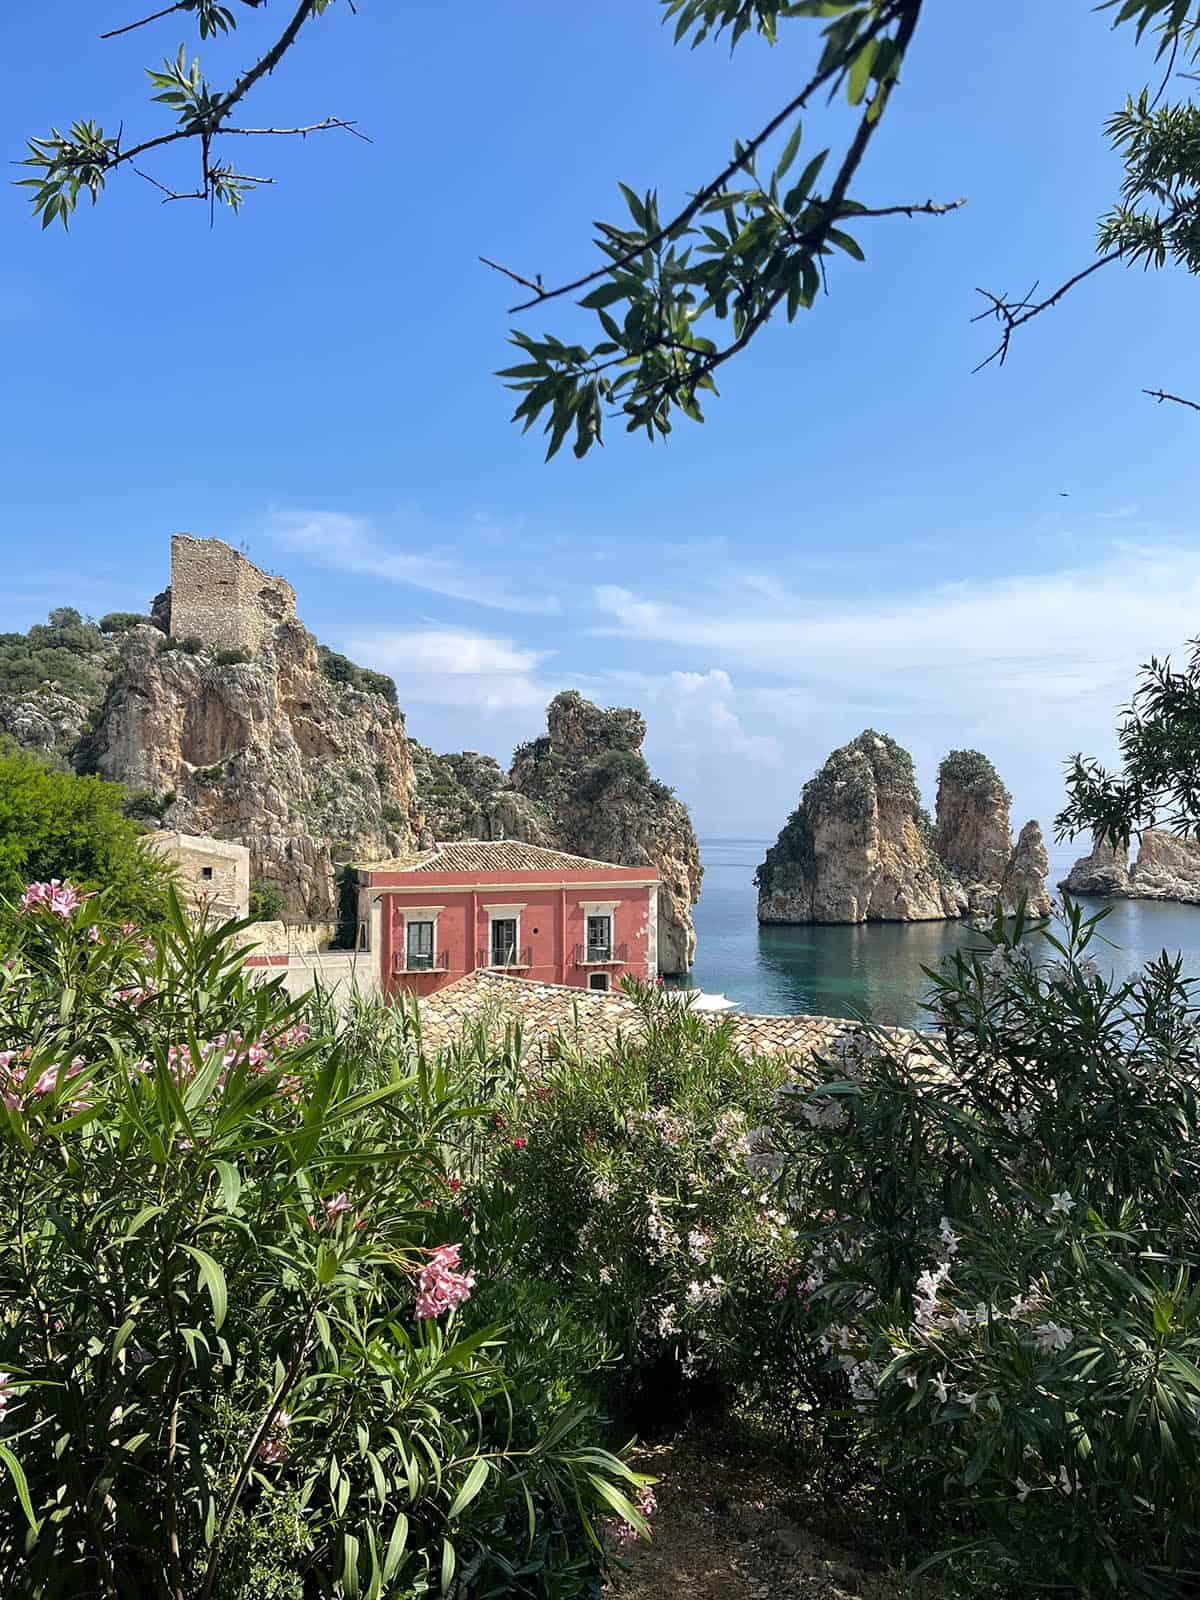 An image of the Tonnara Di Scopello and Torre Scopello along with the surrounding aquamarine waters and plant life.